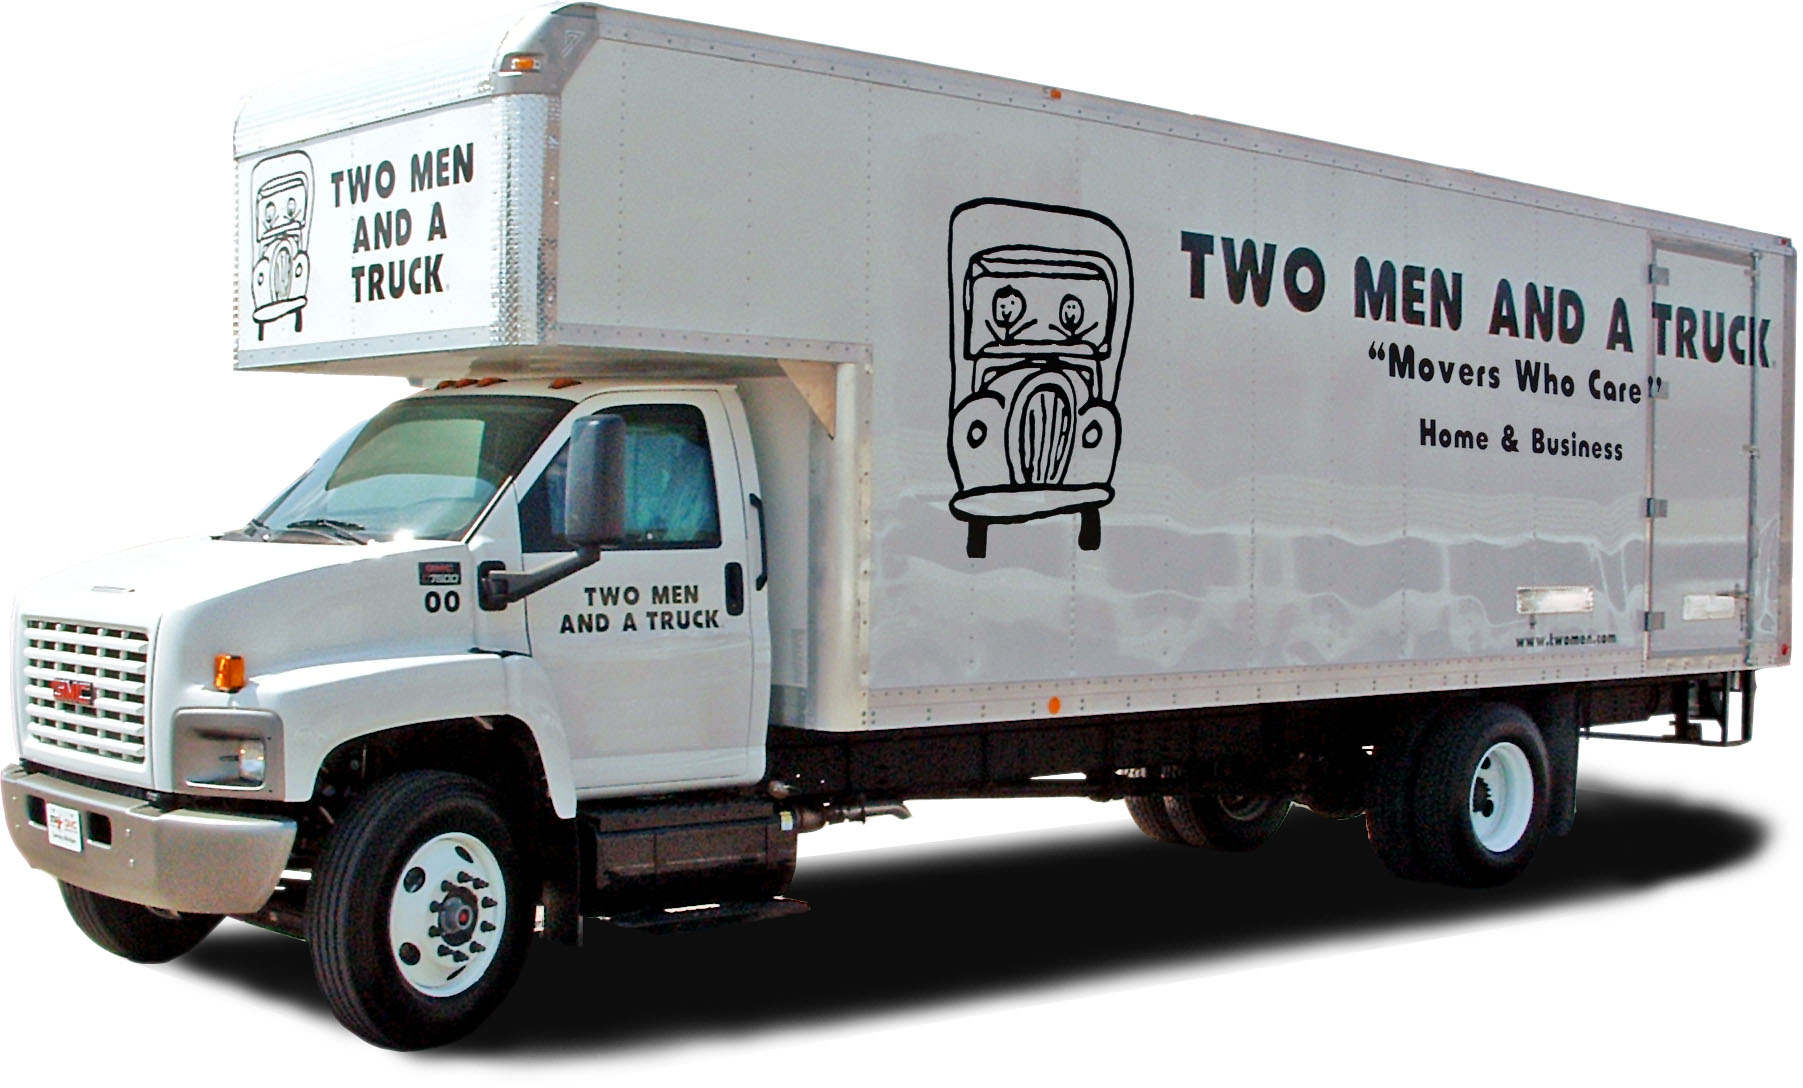 Two Men And A Truck Sacramento Moving Company Gives Advice On How To Pack A Garage Or Storage 